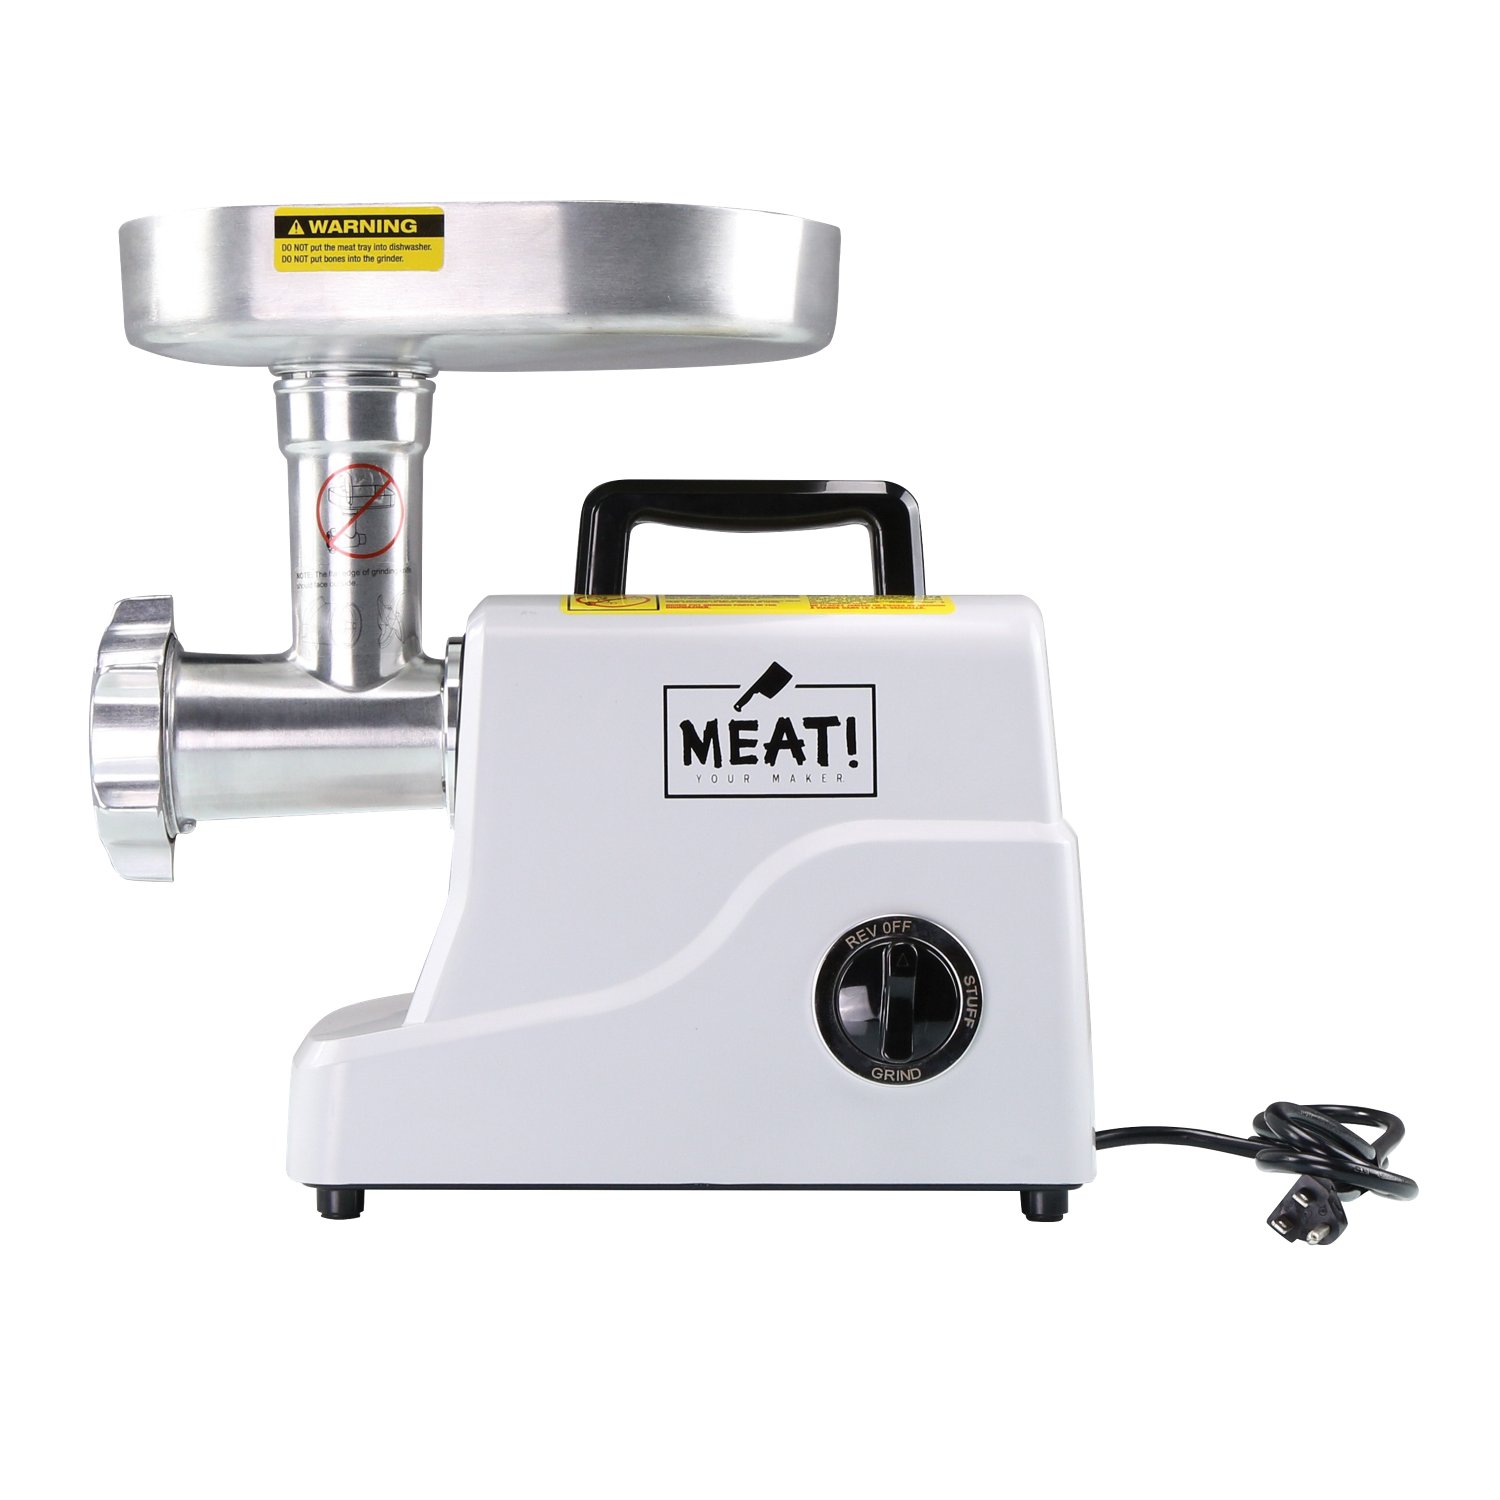 Meat Pro External Sealer - Food Processing at Academy Sports